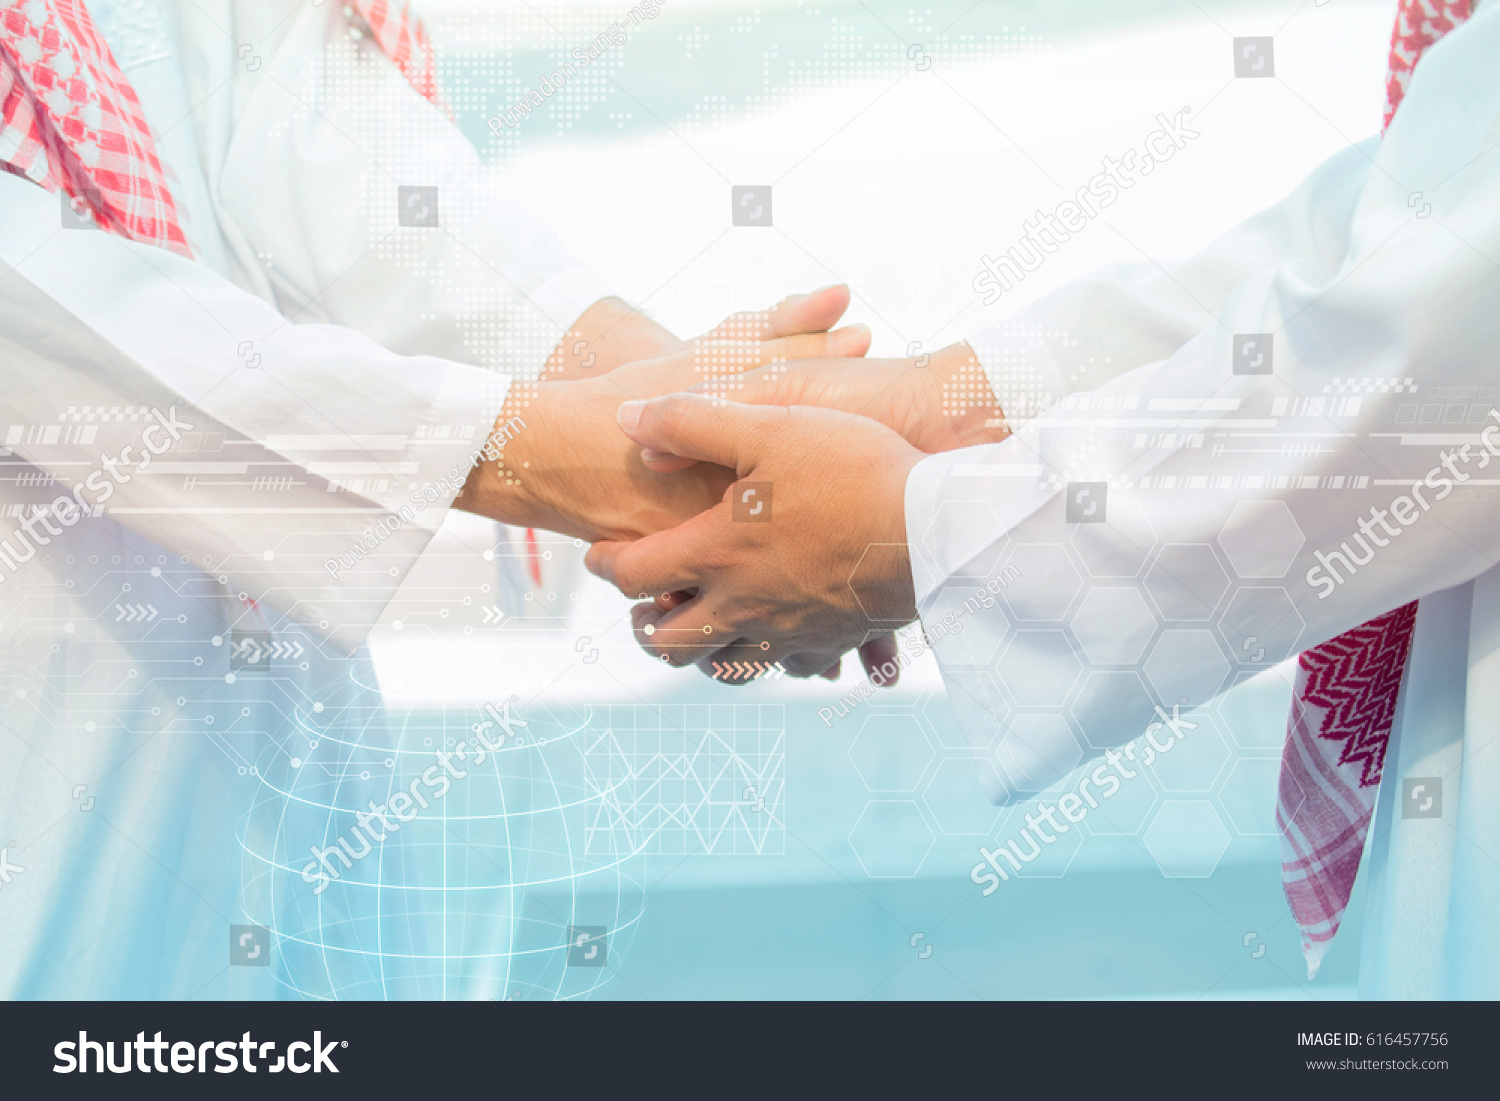 Arab Business handshake and business people on city background #616457756